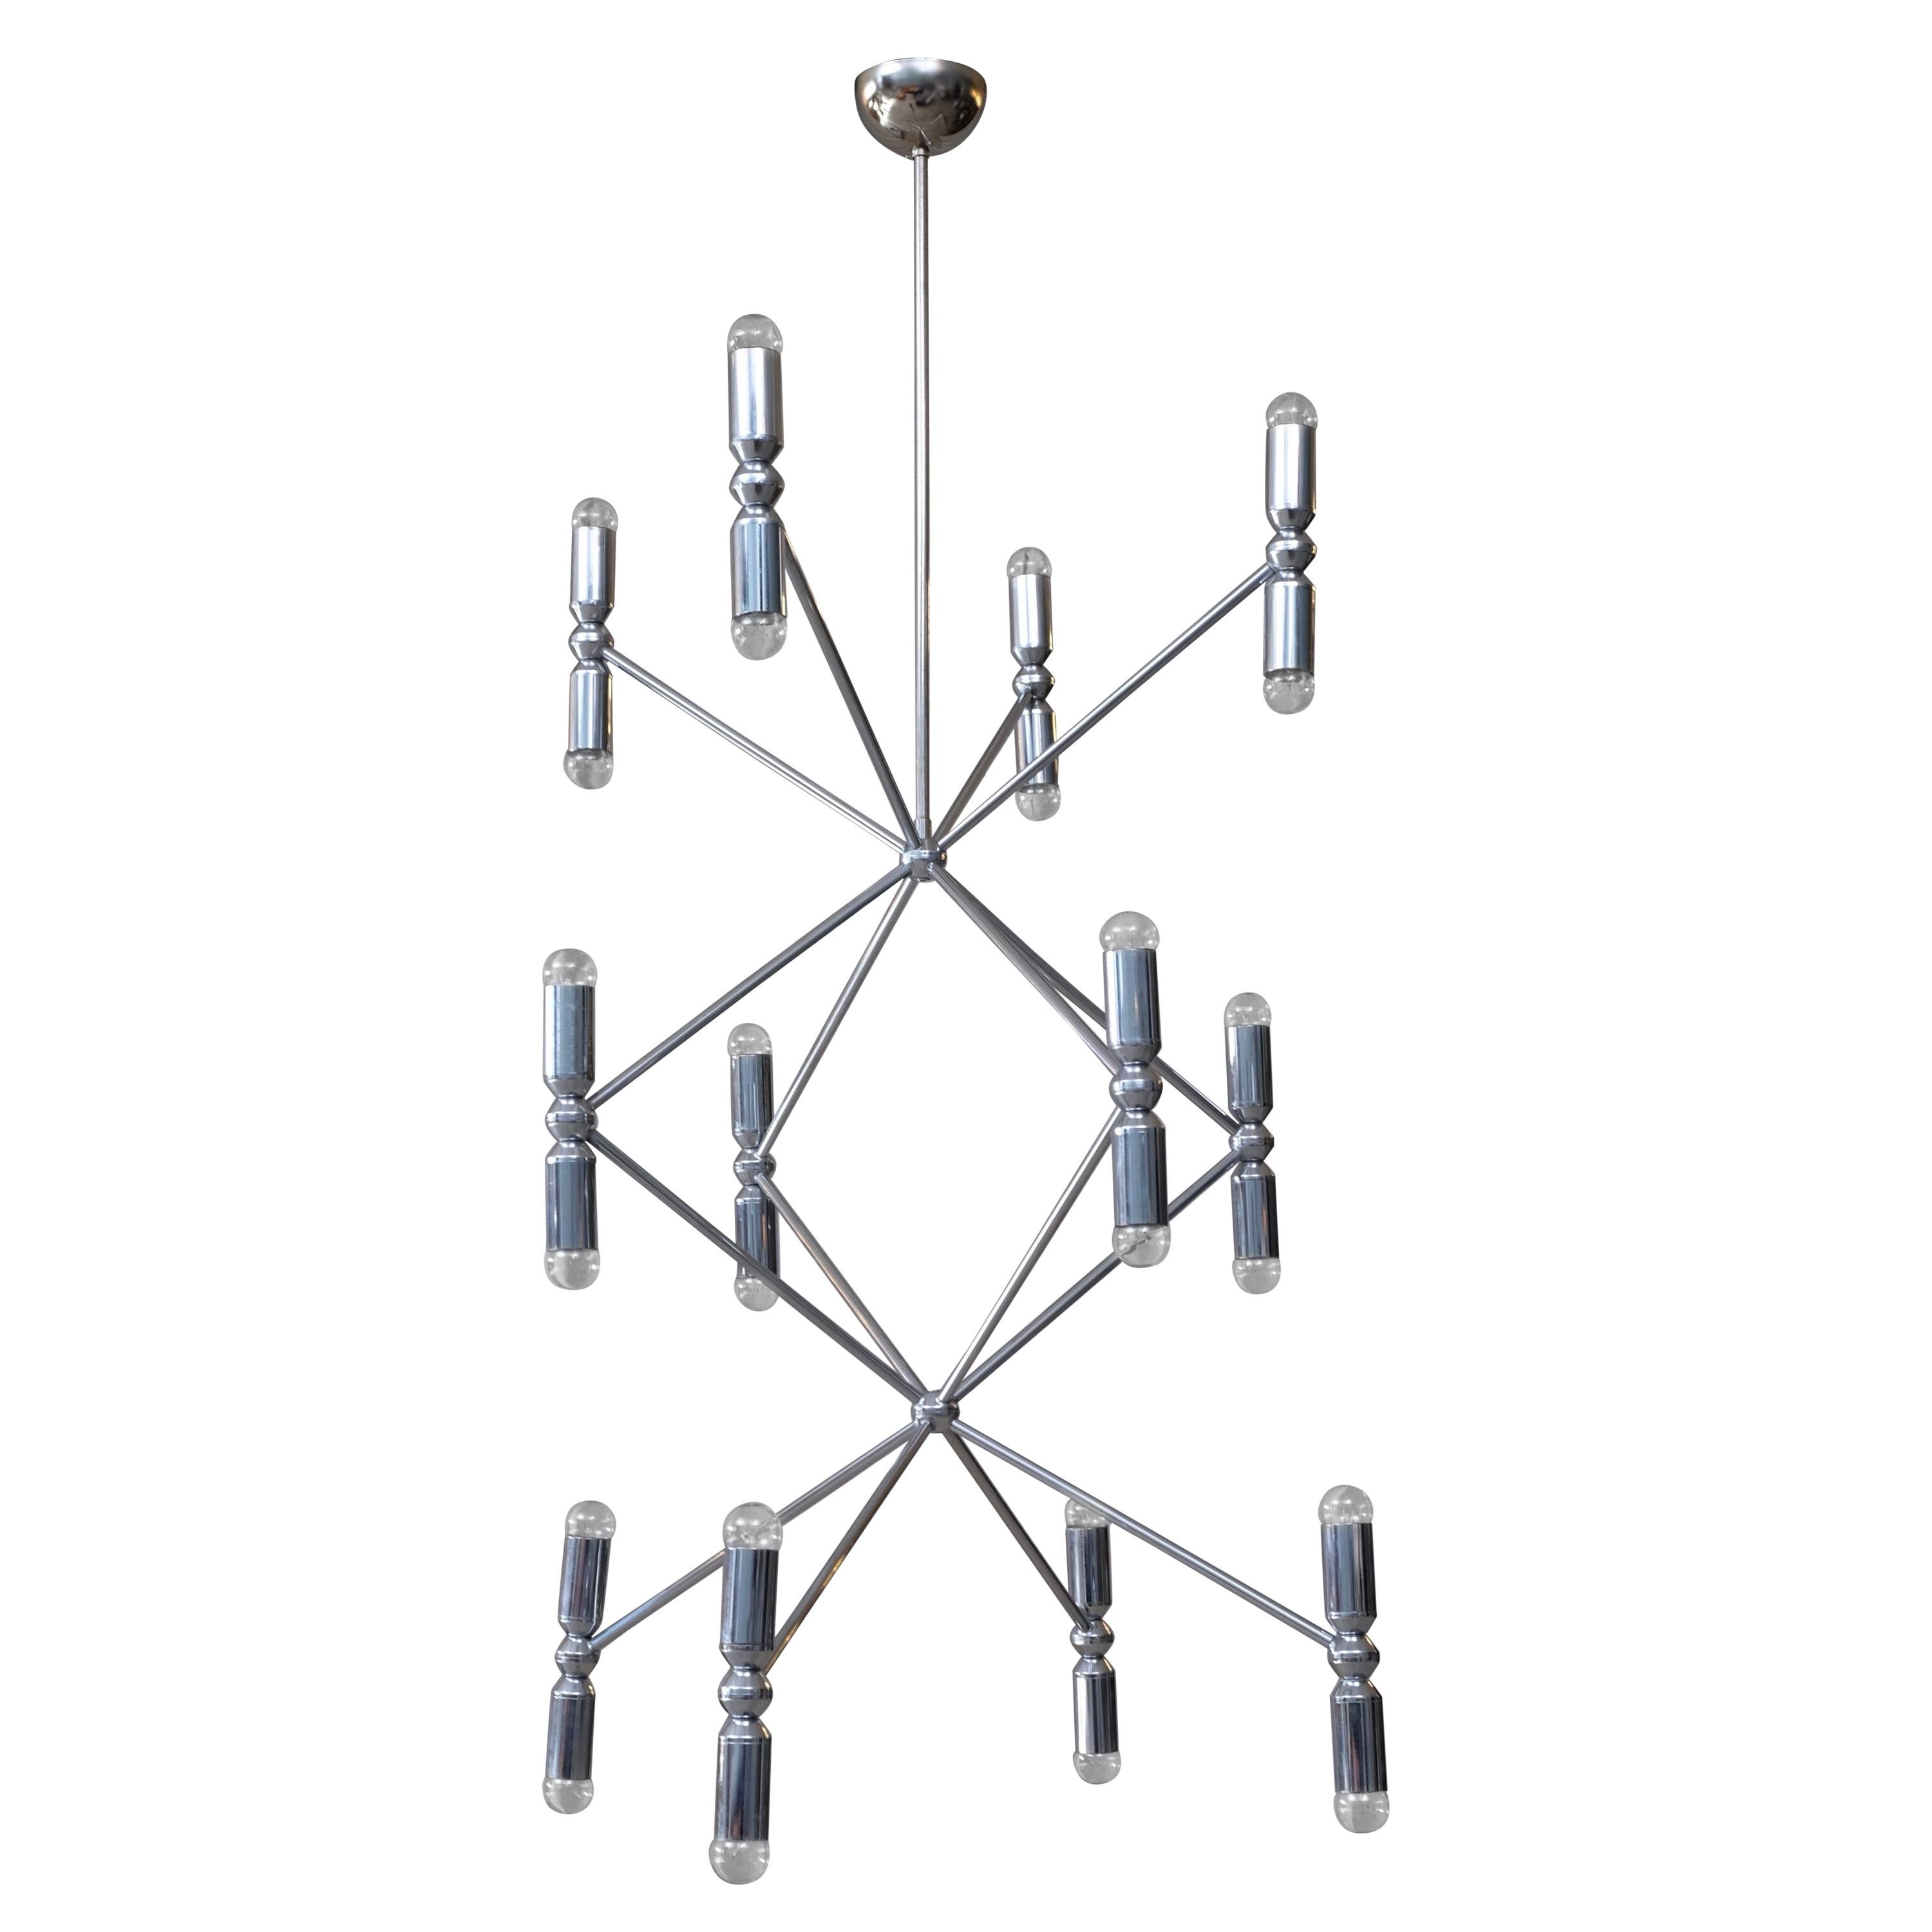 Rare 12-Arm Chandelier with 24 Lights in Chrome, 1970s For Sale